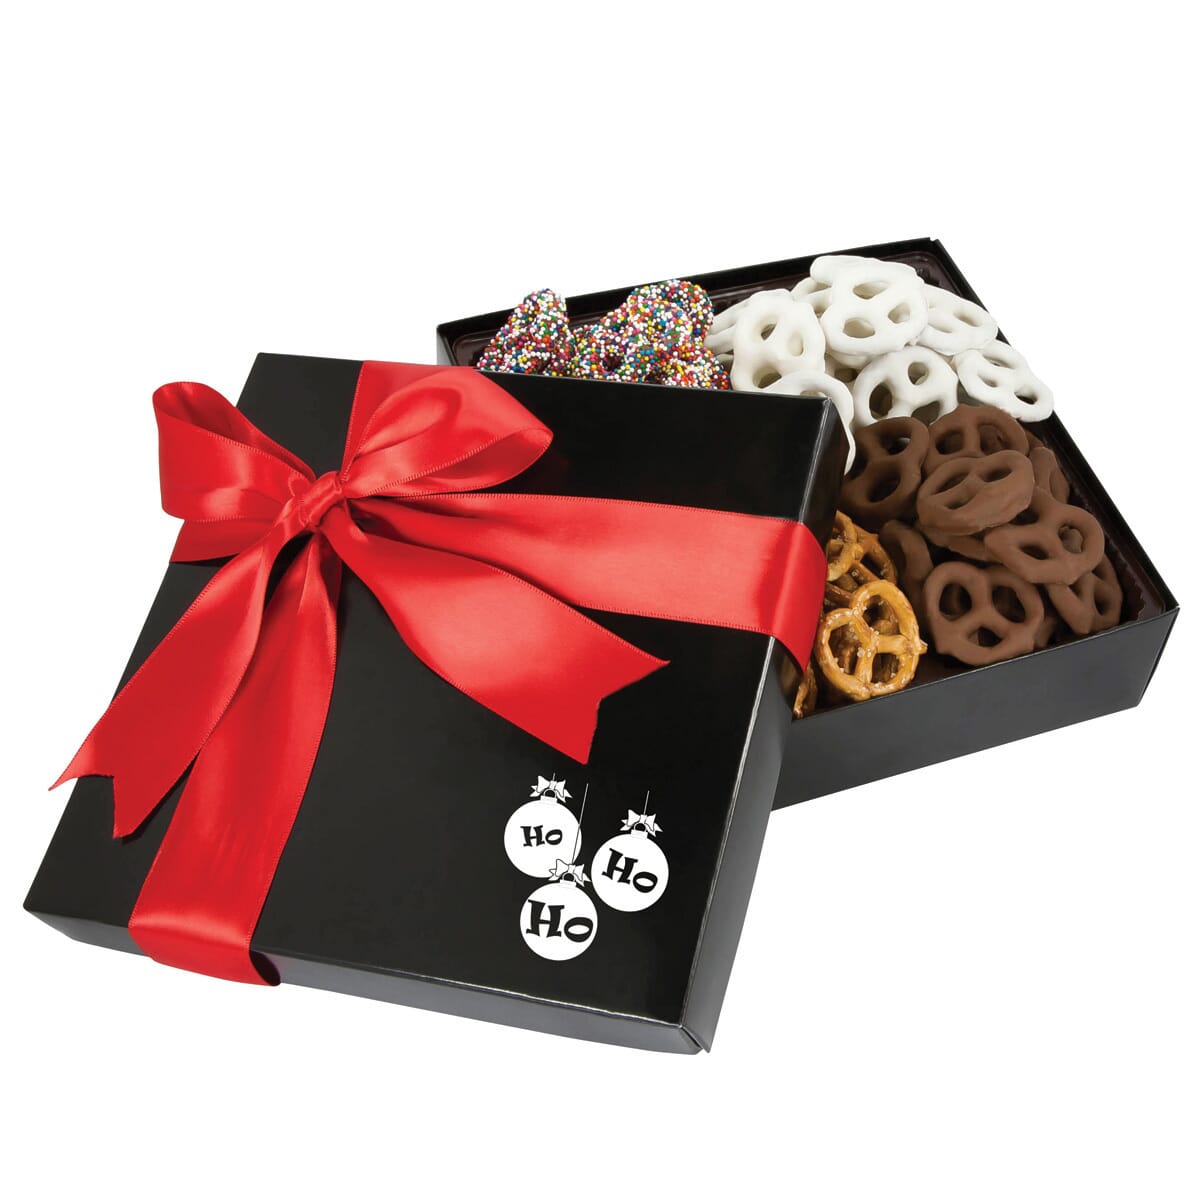 Gourmet food gift with holiday saying